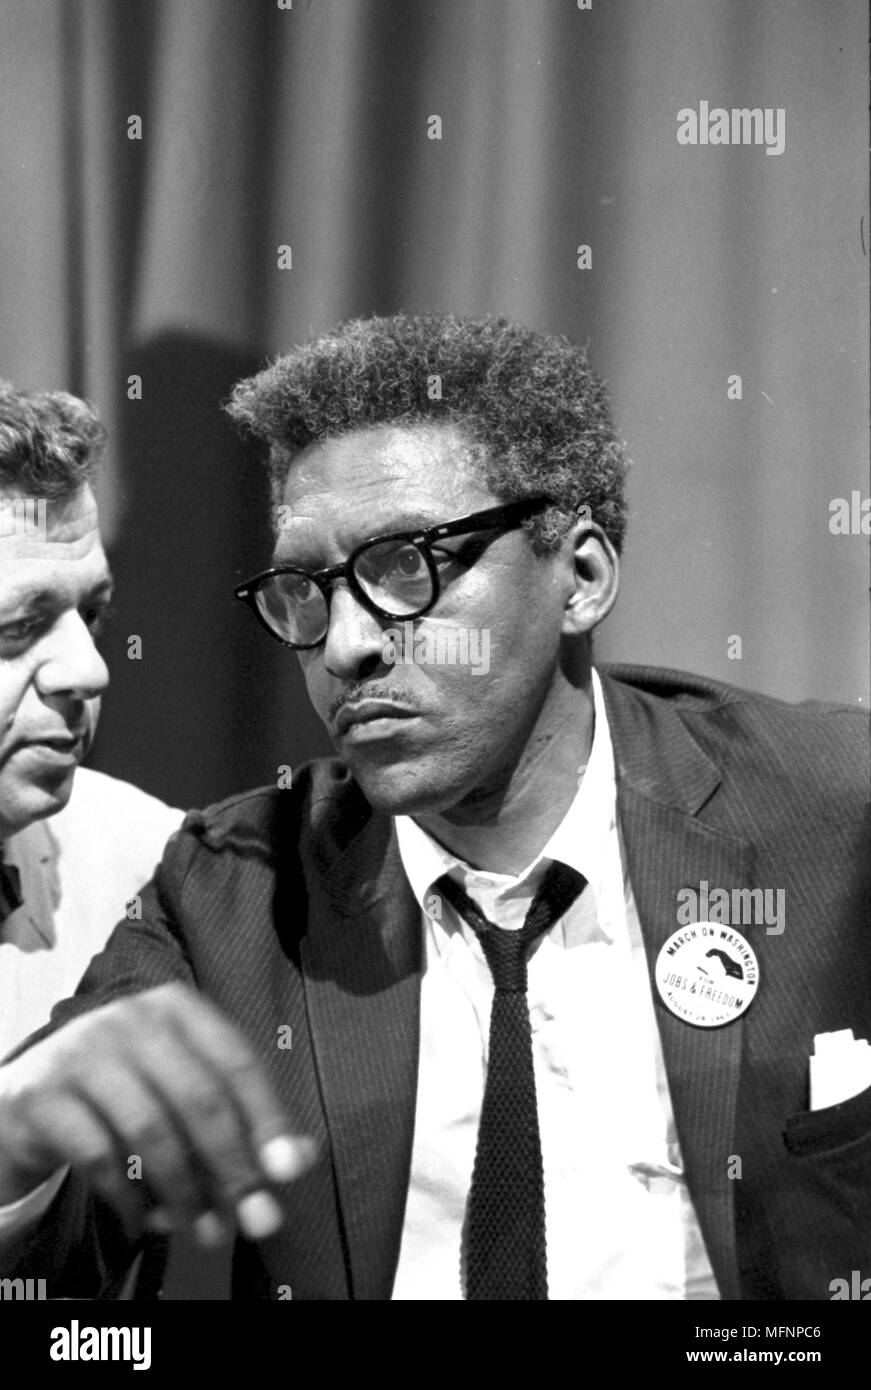 Bayard Rustin (1912-1987), American civil rights activist. Rustin in the Statler Hotel at a news briefing on the Civil Rights March on Washington, DC, USA, 27 August 1963. Photographer: Warren K  Leffler. Stock Photo